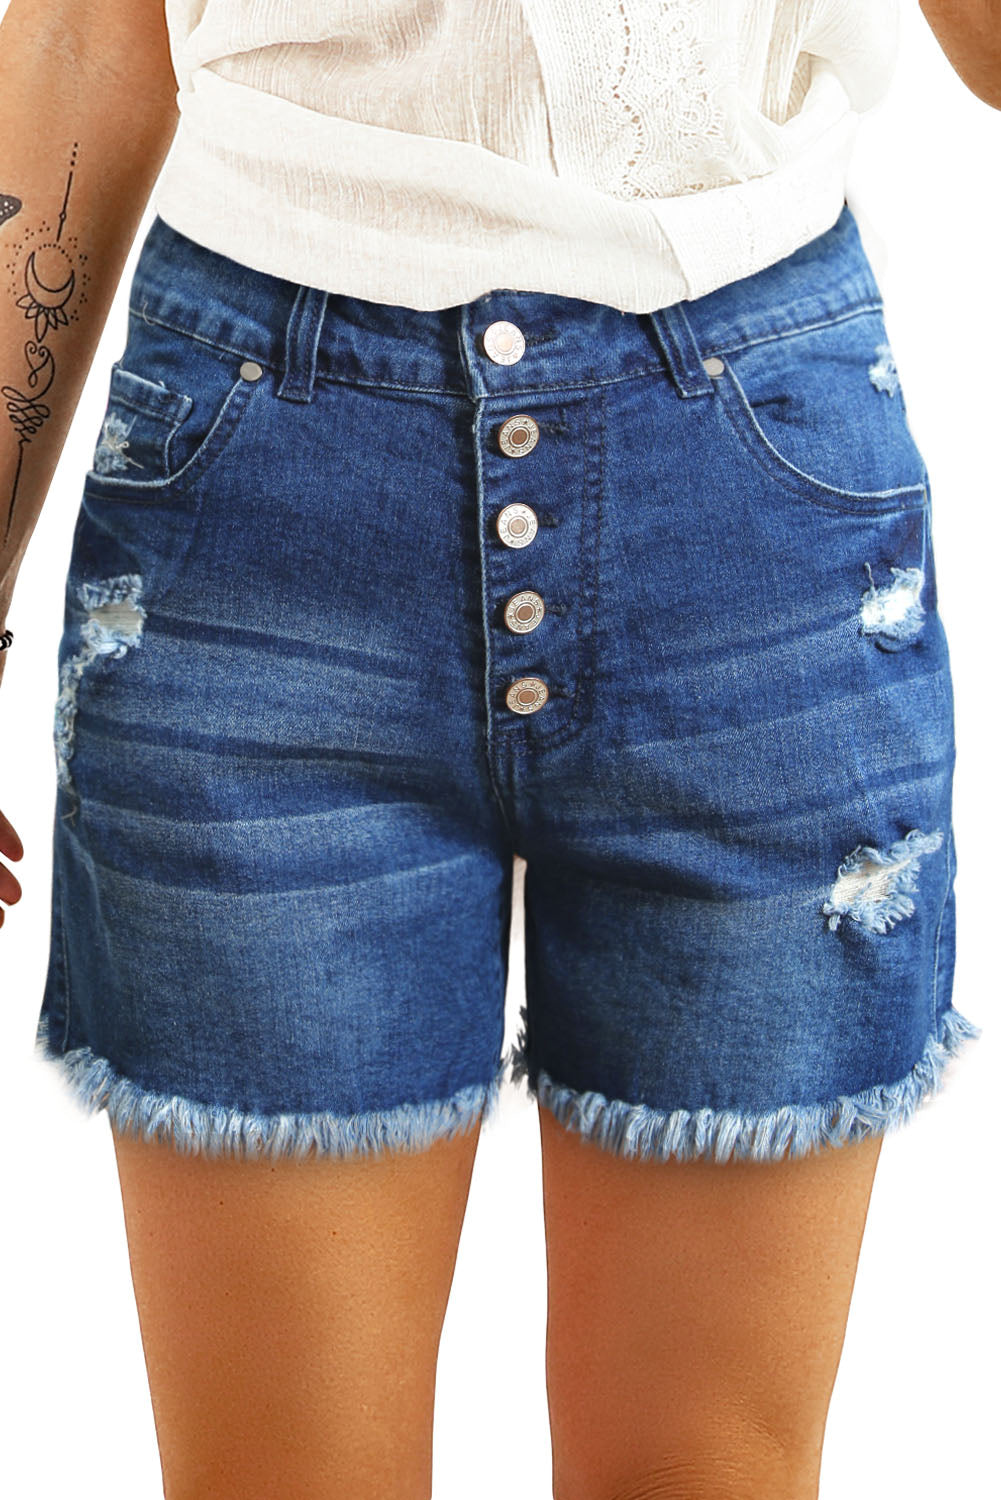 Blue Women's Casual Frayed Hem Single-breasted Ripped Denim Shorts LC78838-5